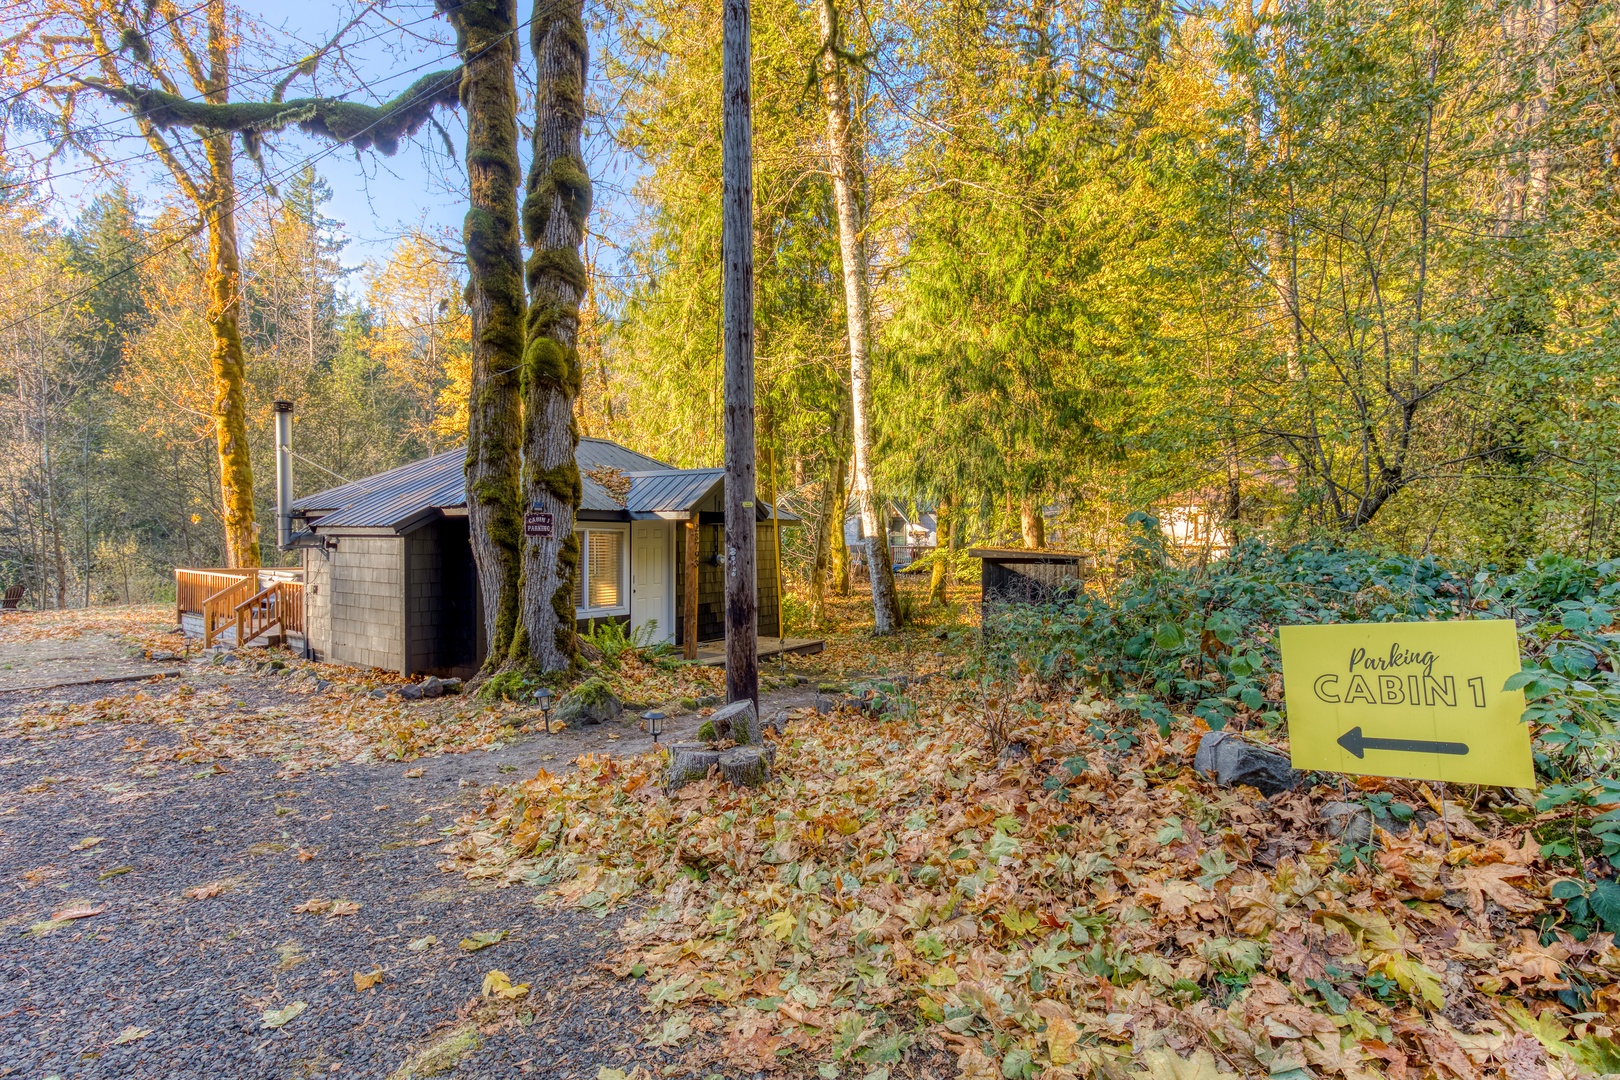 Rhododendron Vacation Rentals, Riverbend Cabin #1 - Surroundings